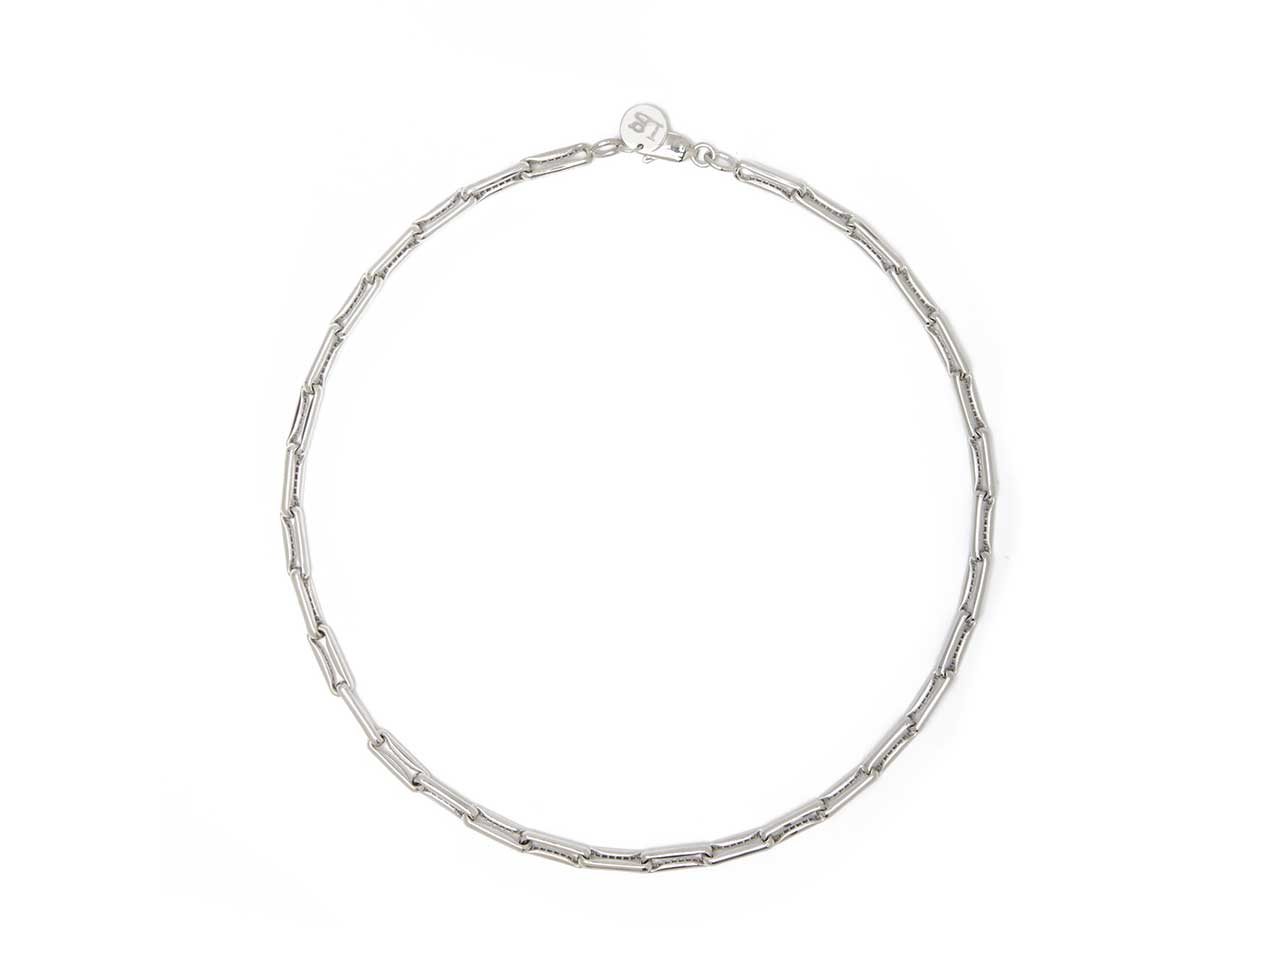 A silver jewellery paperclip necklace from Canadian brand Liza Gozlan.